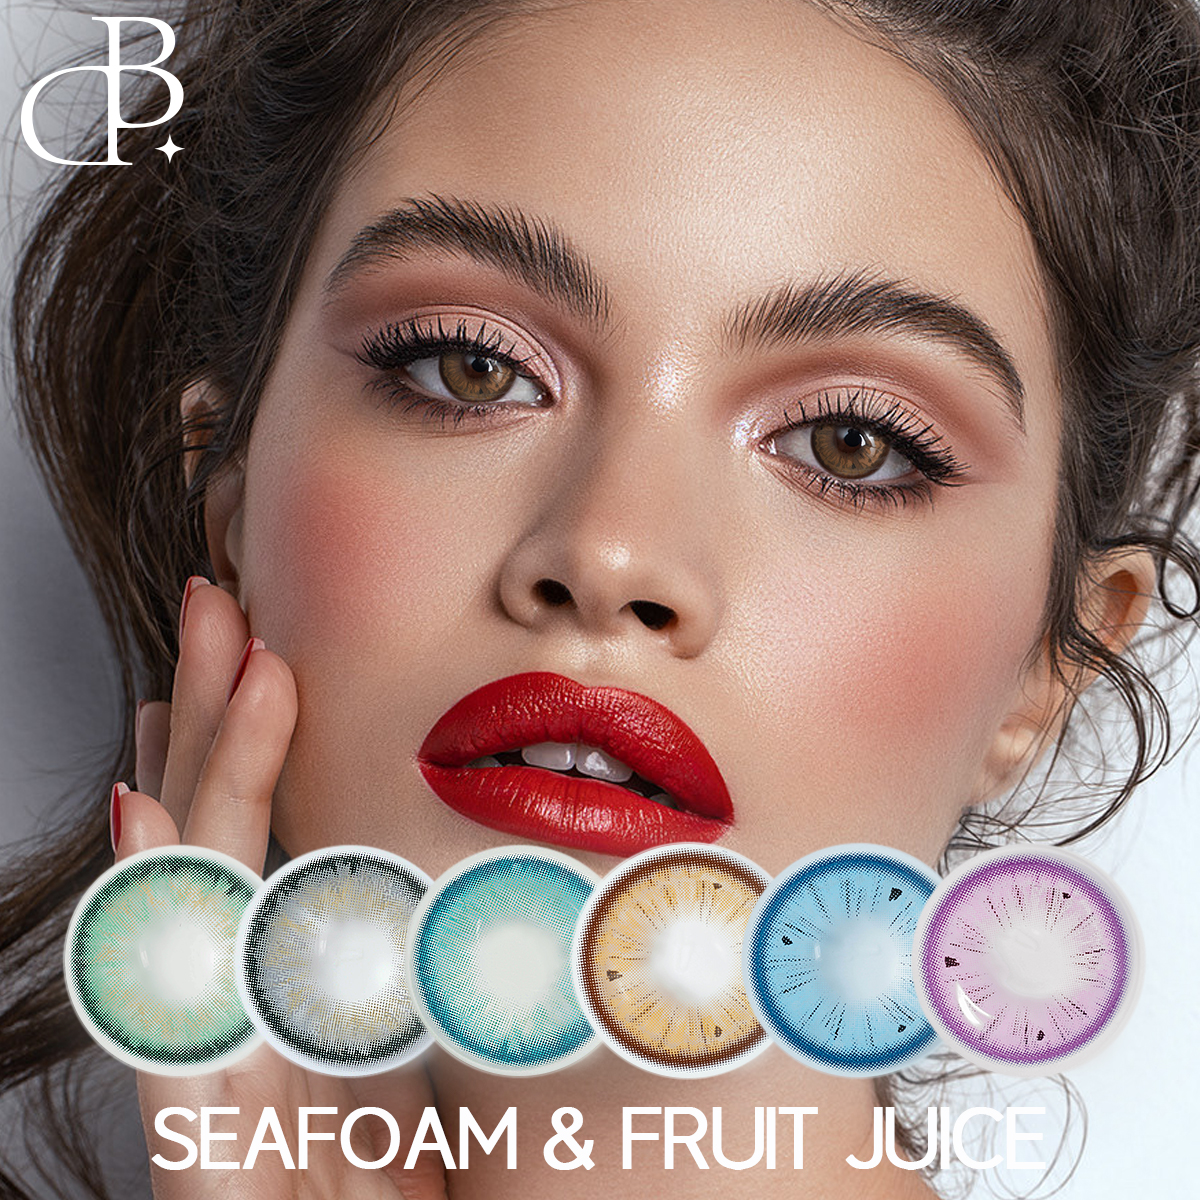 https://www.dbleses.com/seafoamfruit-juice-oemodm-contacto-new-style-natural-eyes-colored-lens-cosmetic-eyes-lens-color-contacts-lenses-product/